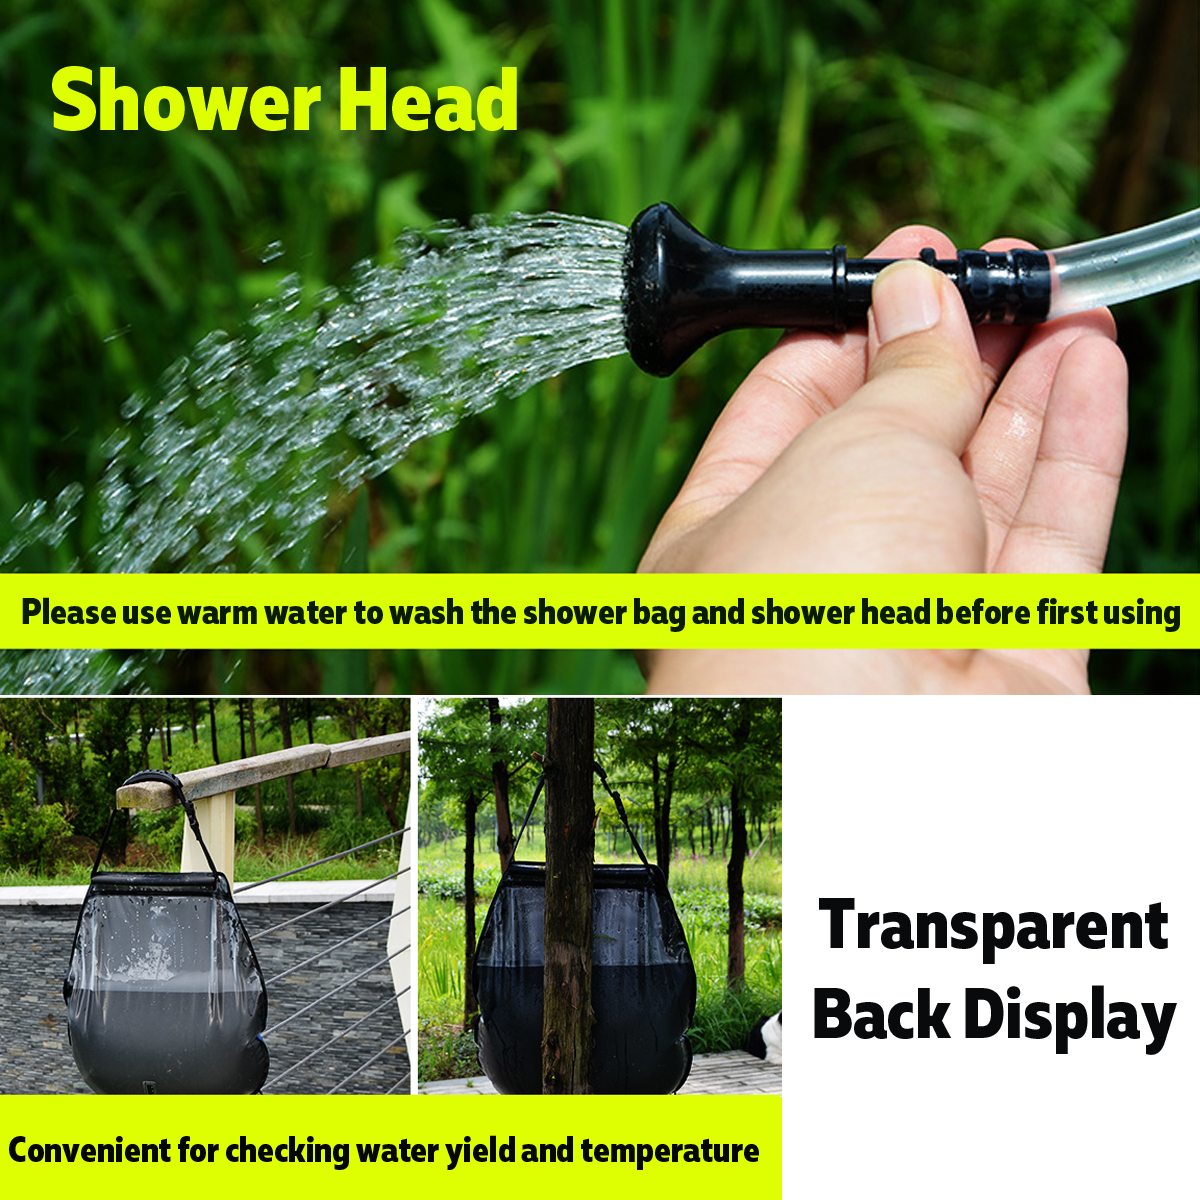 20L-Foldable-Portable-Water-Shower-Bathing-Bag-Solar-Energy-Heated-PVC-Outdoor-Travel-Camping-1724741-3